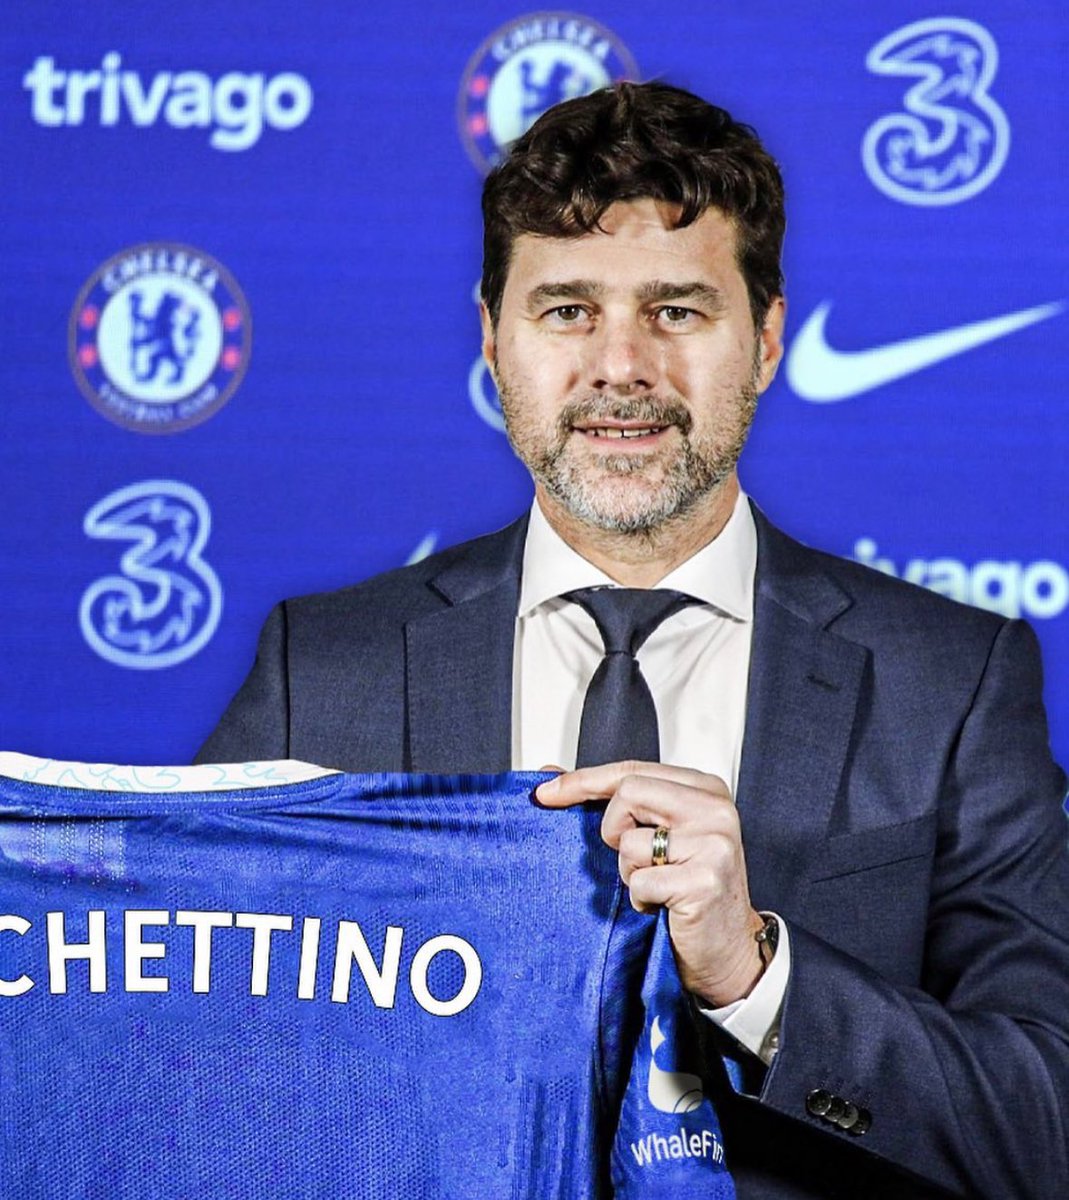 Mauricio Pochettino has finally signed the contract as new Chelsea head coach after verbal agreement reached 2 weeks ago. 🚨🔵✍🏻 #CFC

Official statement ready, he’s starting his job as Chelsea manager next week.

Contract will be valid until June 2026.

Here we go confirmed.